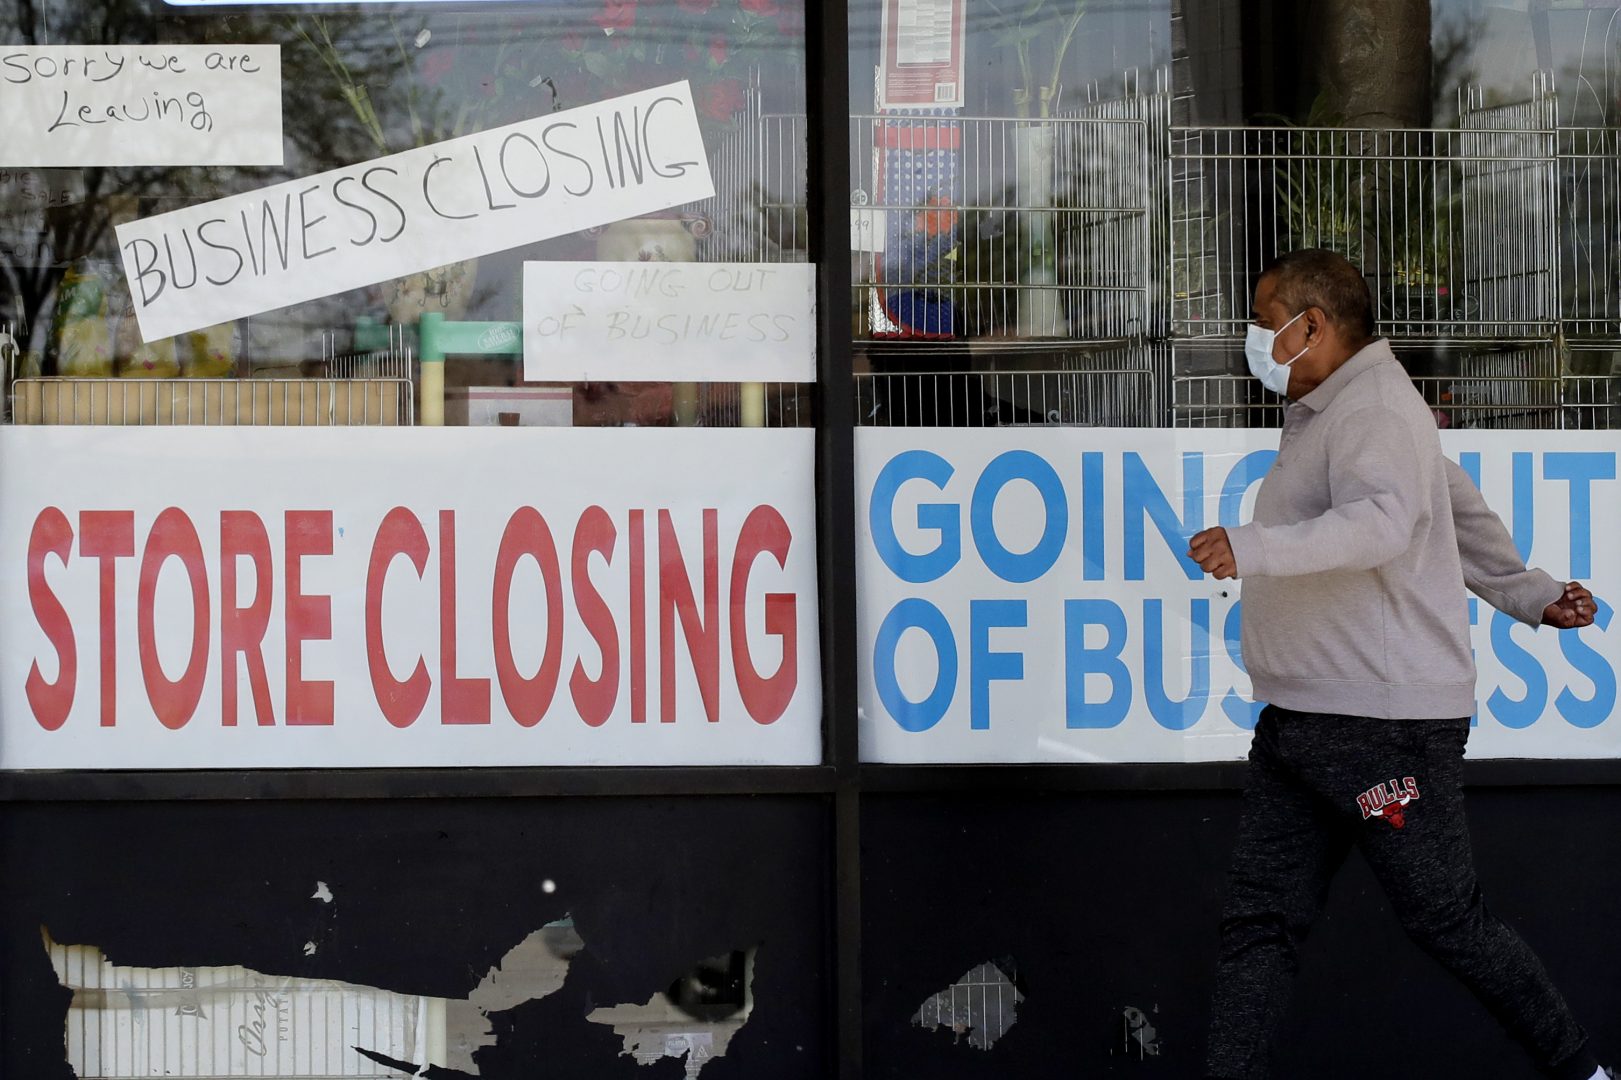 FILE - In this May 21, 2020 file photo, a man looks at signs of a closed store due to COVID-19 in Niles, Ill.   